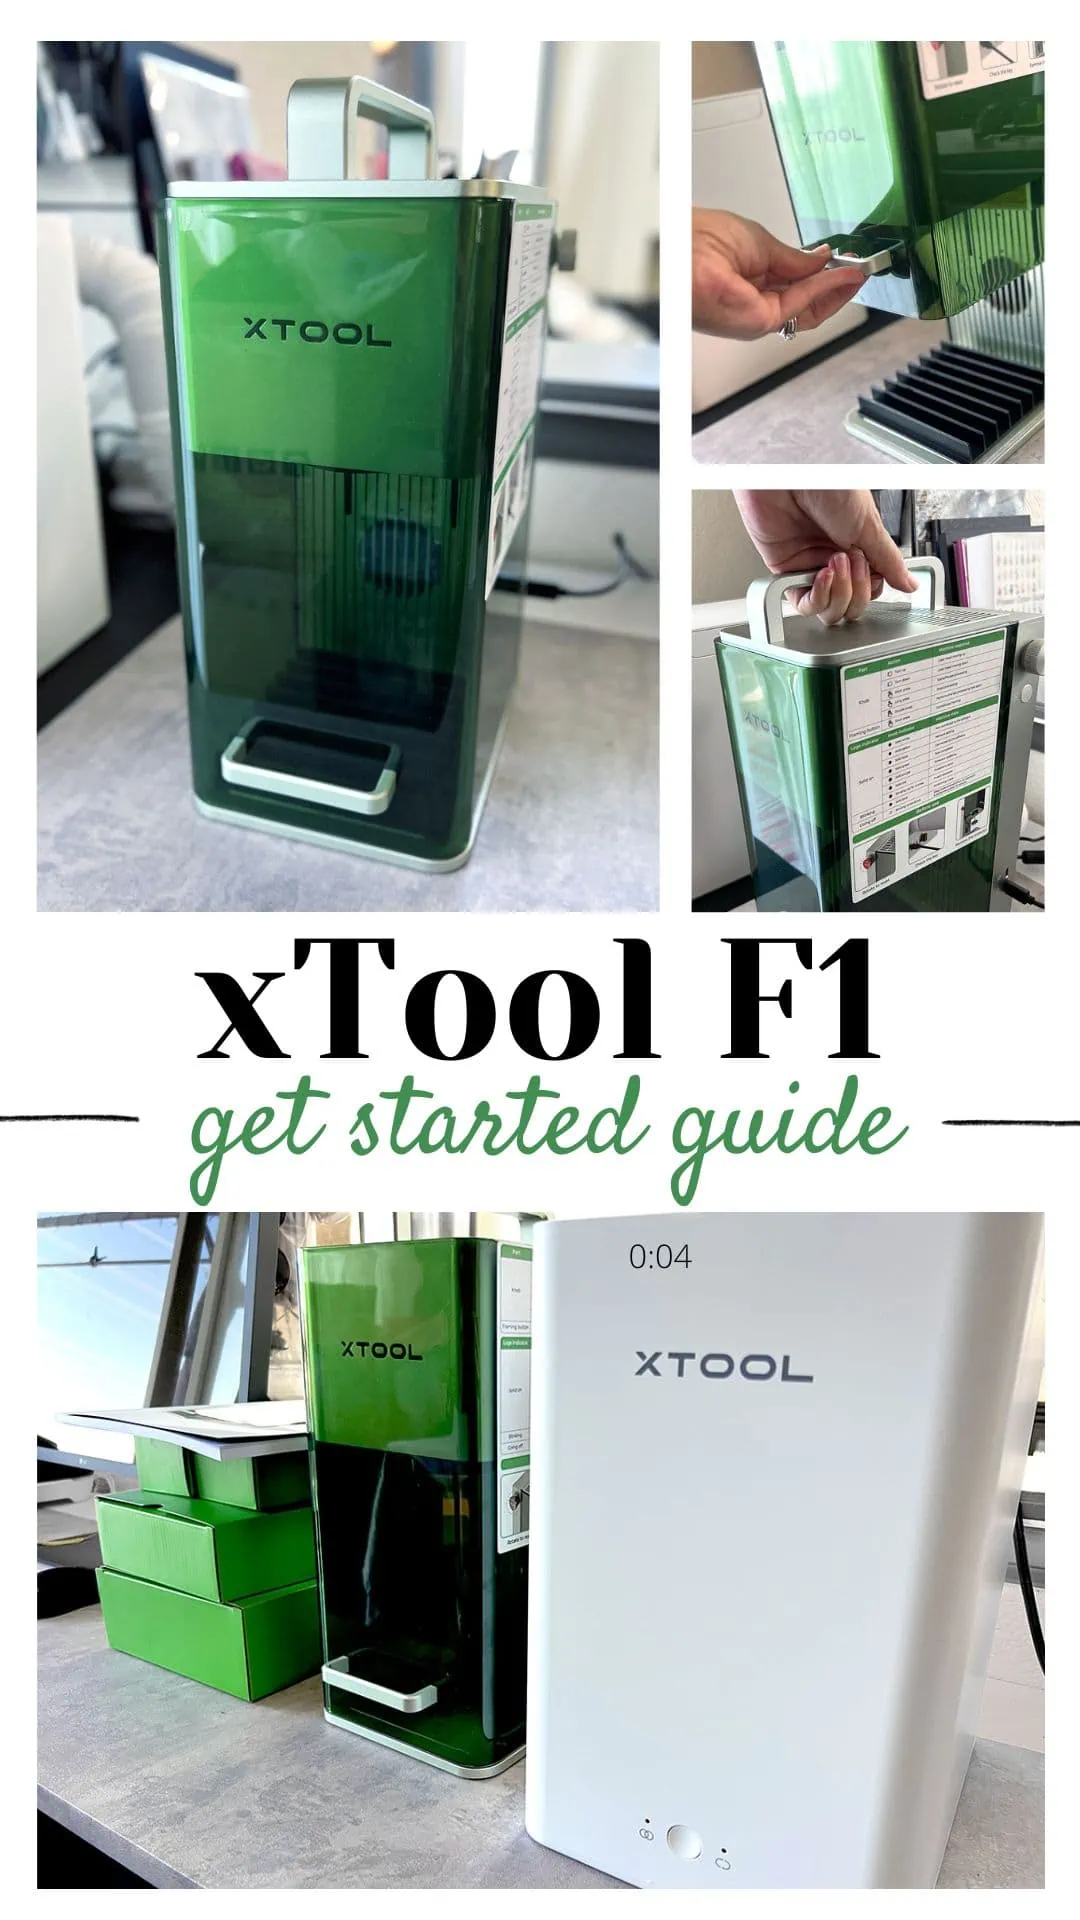 Watch This Before You Buy The xTool F1 